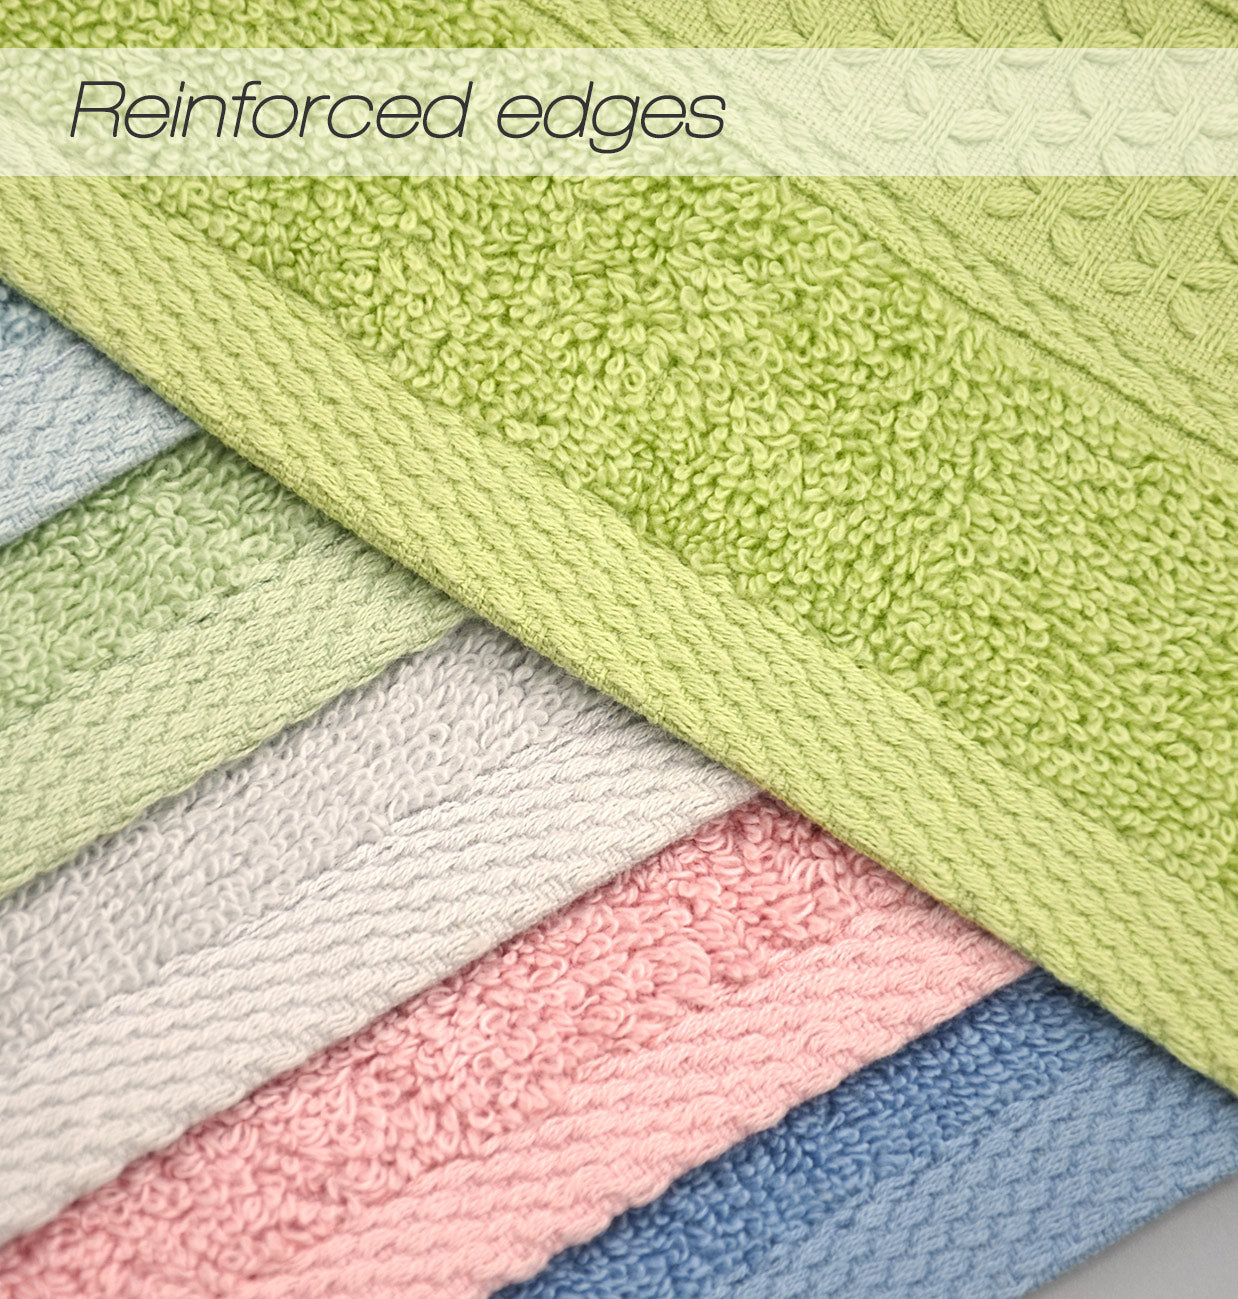 Cleanbear Ultra Soft Hand Towels 100% Cotton Face Towels - Highly Absorbent  Bathroom Towels with Assorted Colors (3 Colors 6 Pack) - 13 by 28 Inches